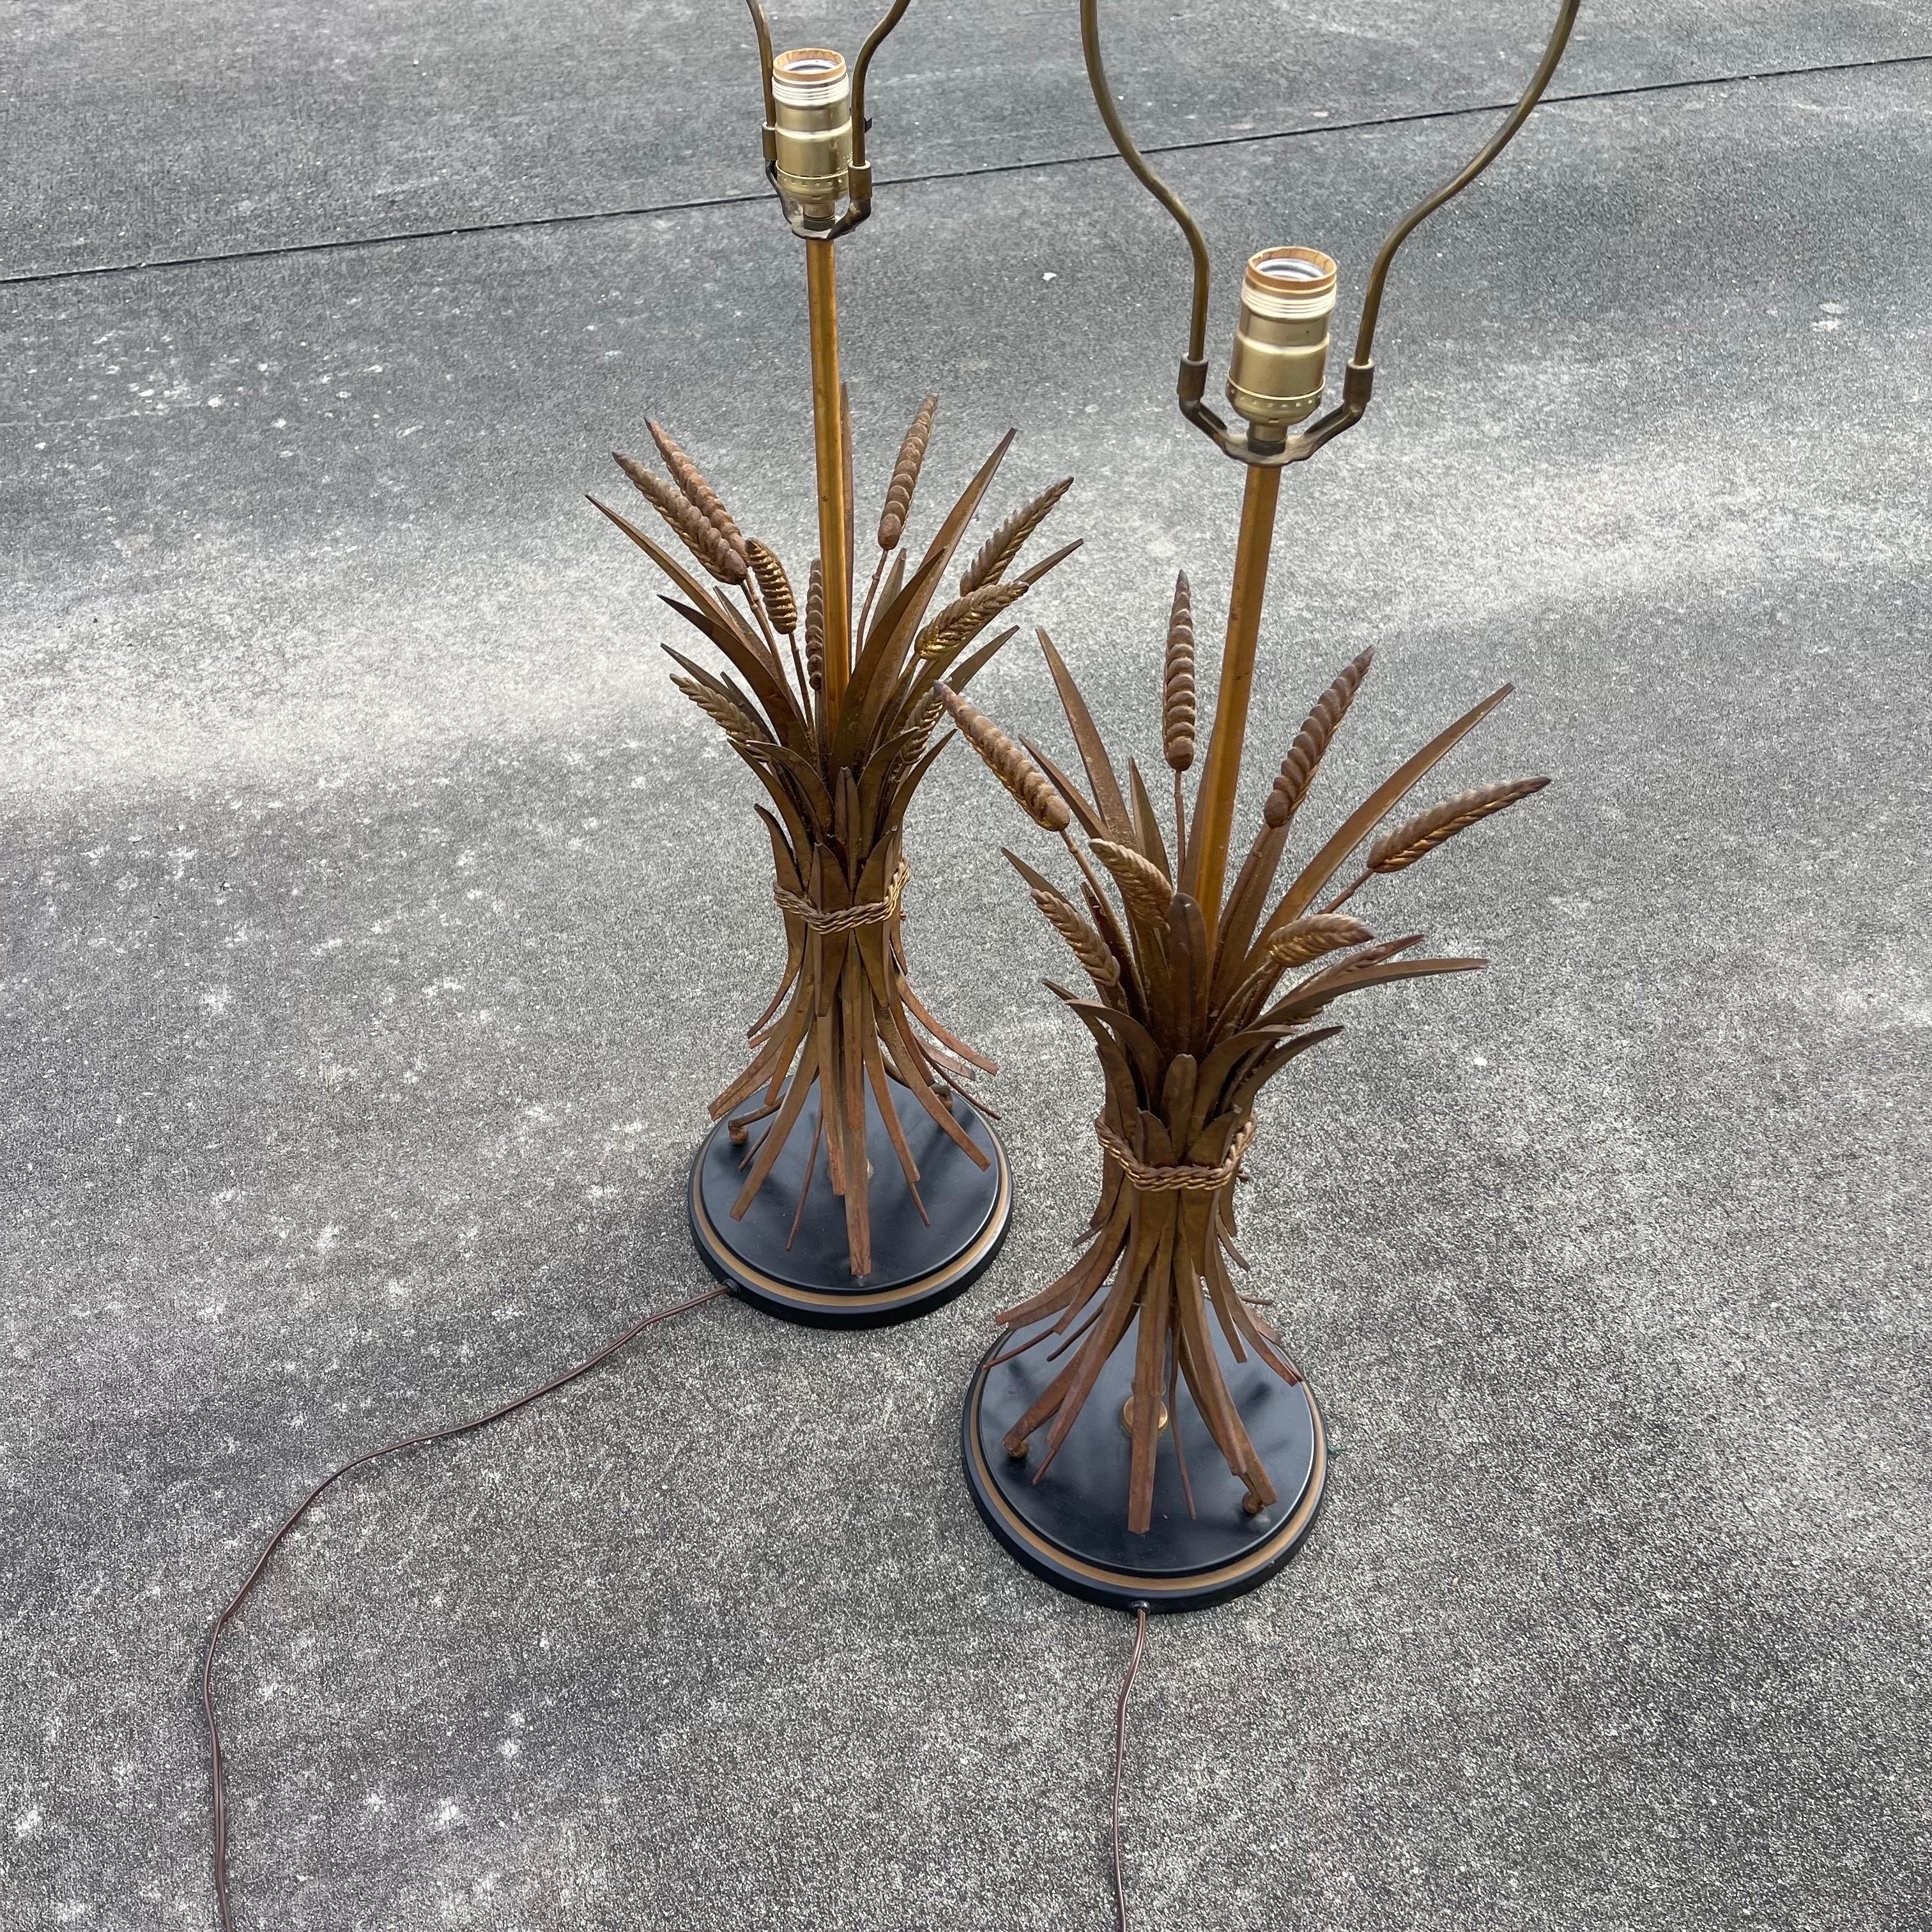 Hollywood Regency Wheat Sheaf Gilt Tole Table Lamps, a Pair For Sale 2